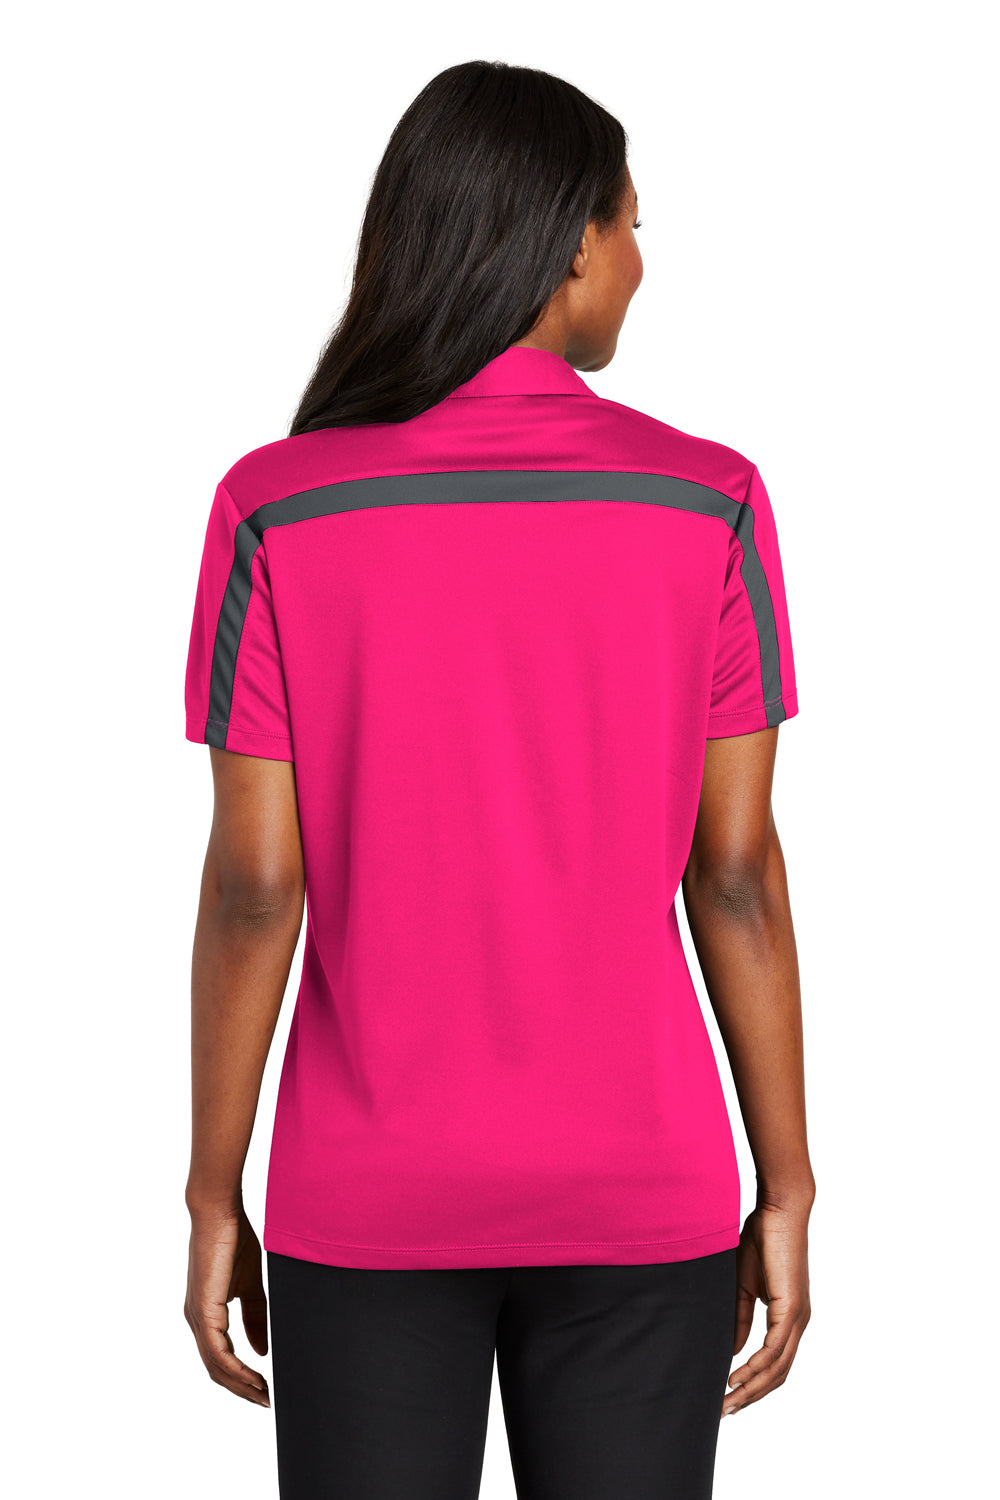 Port Authority L547 Womens Silk Touch Performance Moisture Wicking Short Sleeve Polo Shirt Raspberry Pink/Grey Back